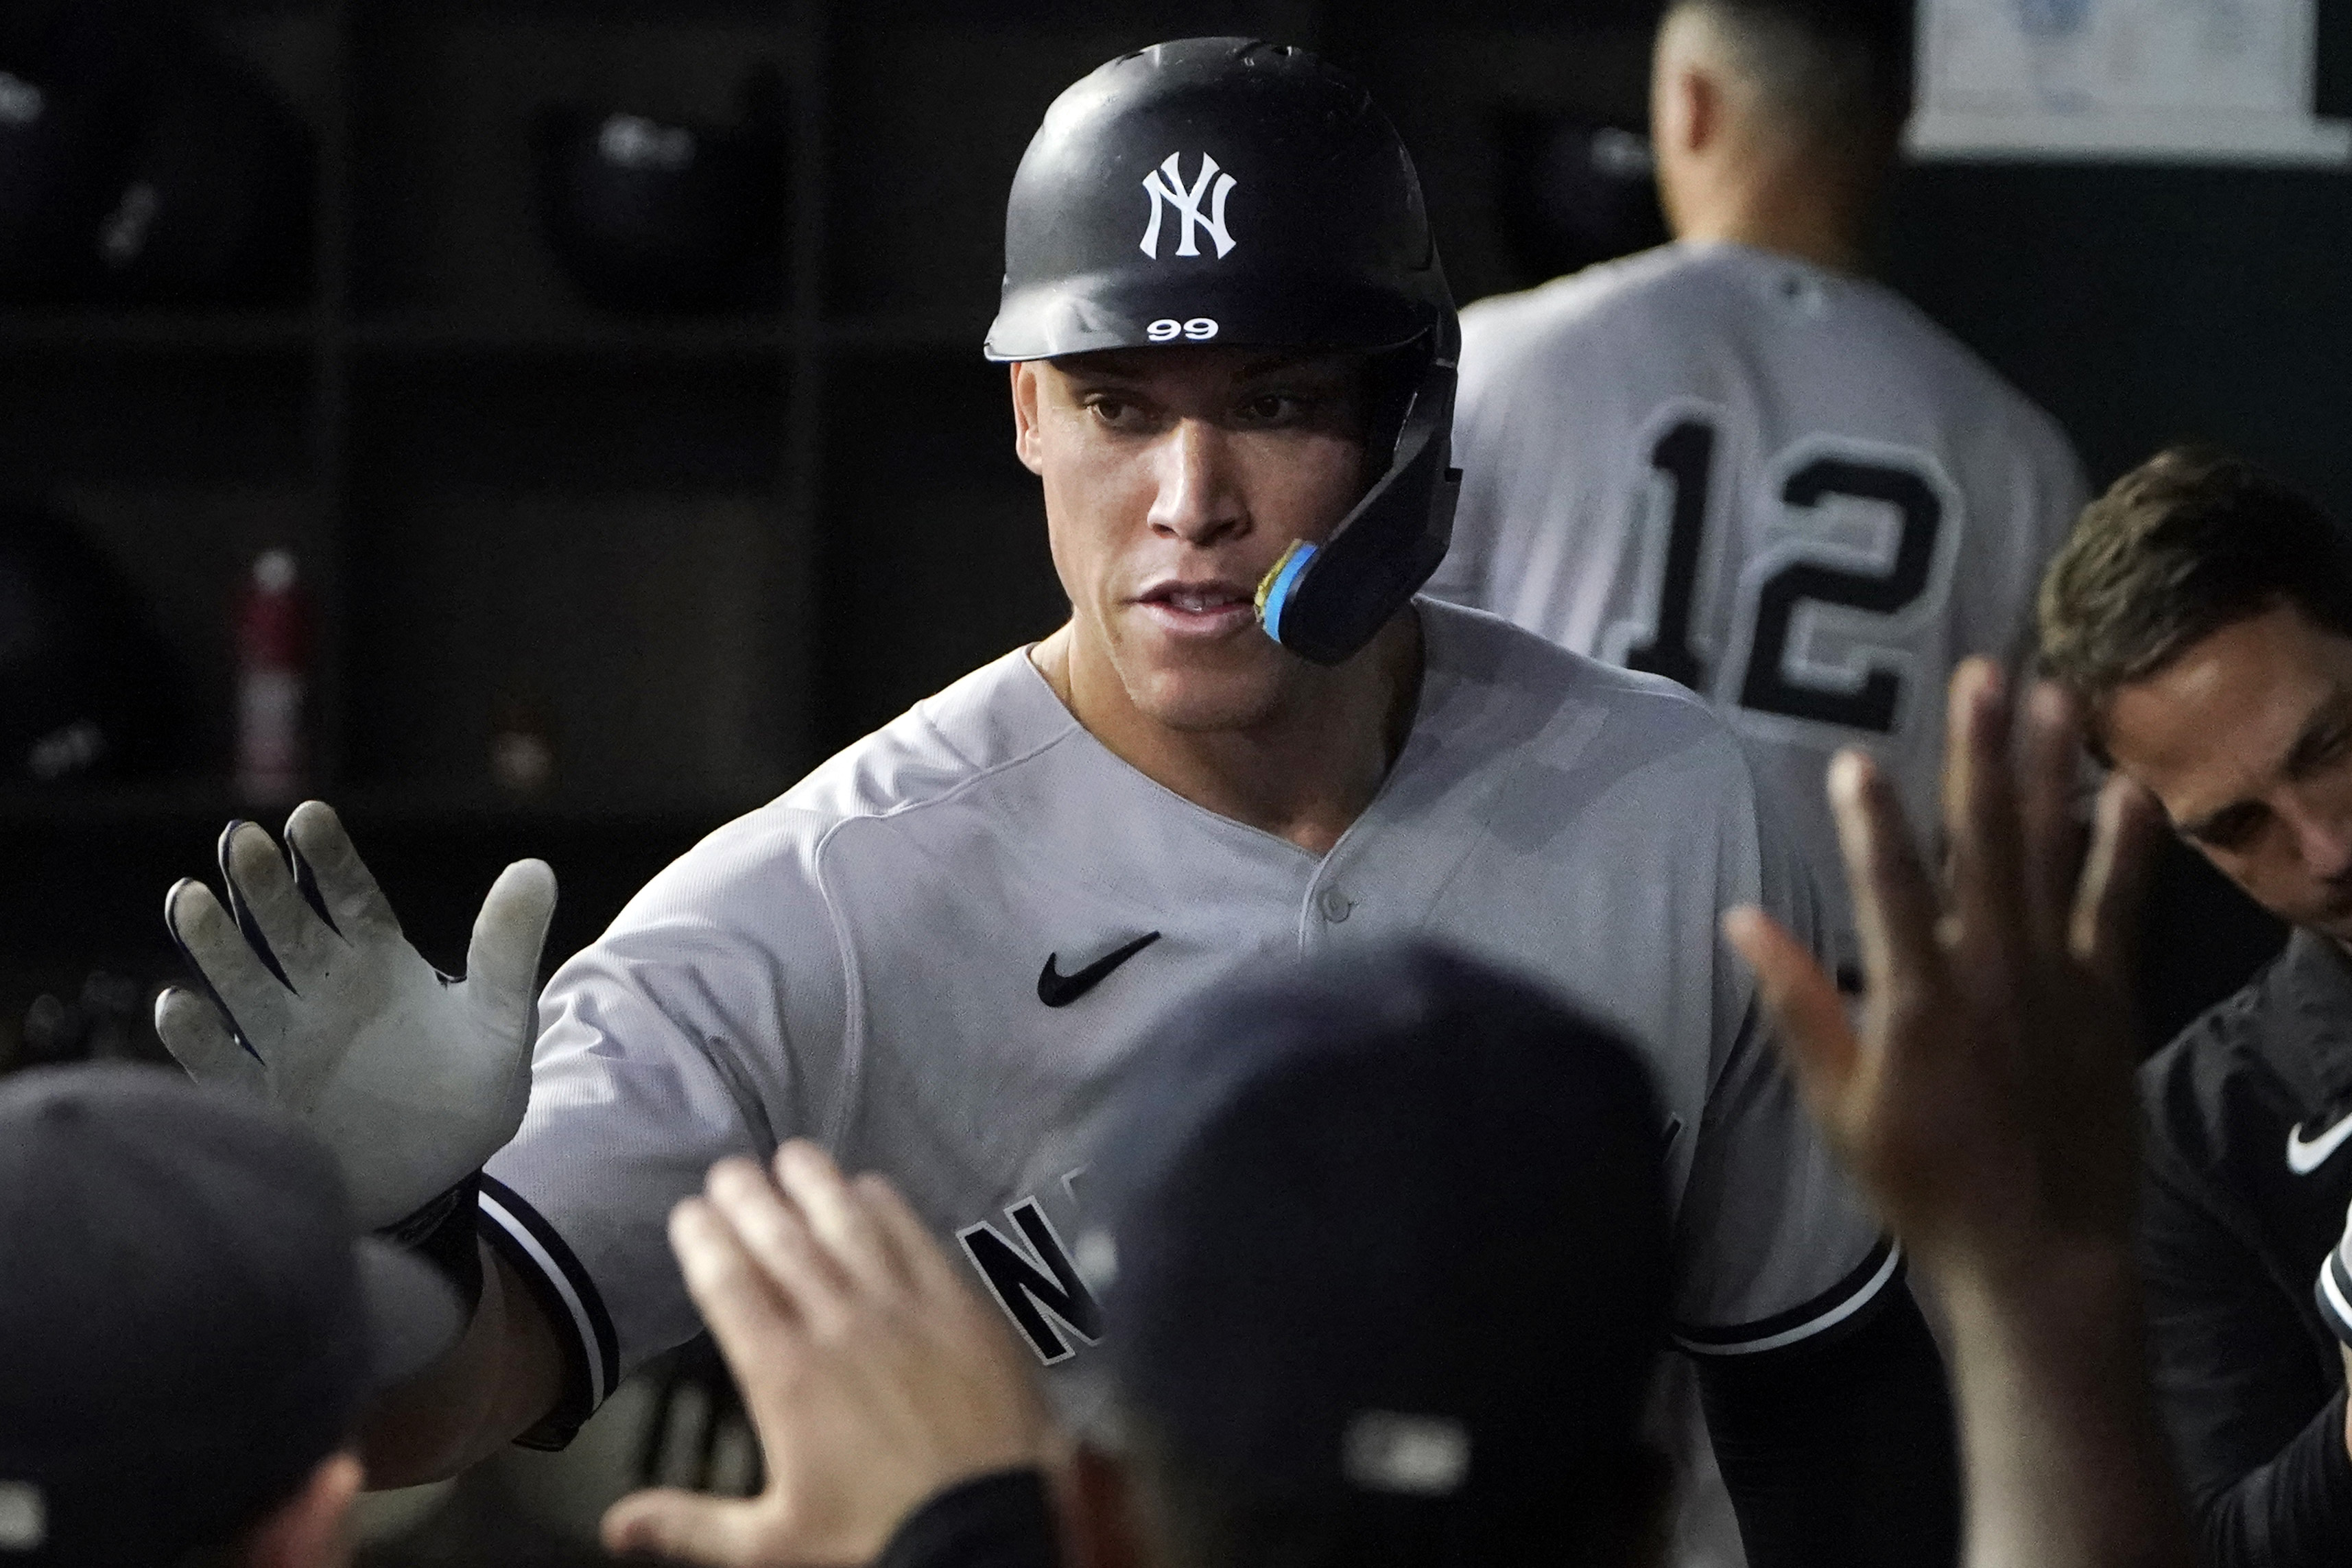 Roger Maris Jr.: 'Clean' Aaron Judge will be real homer champ